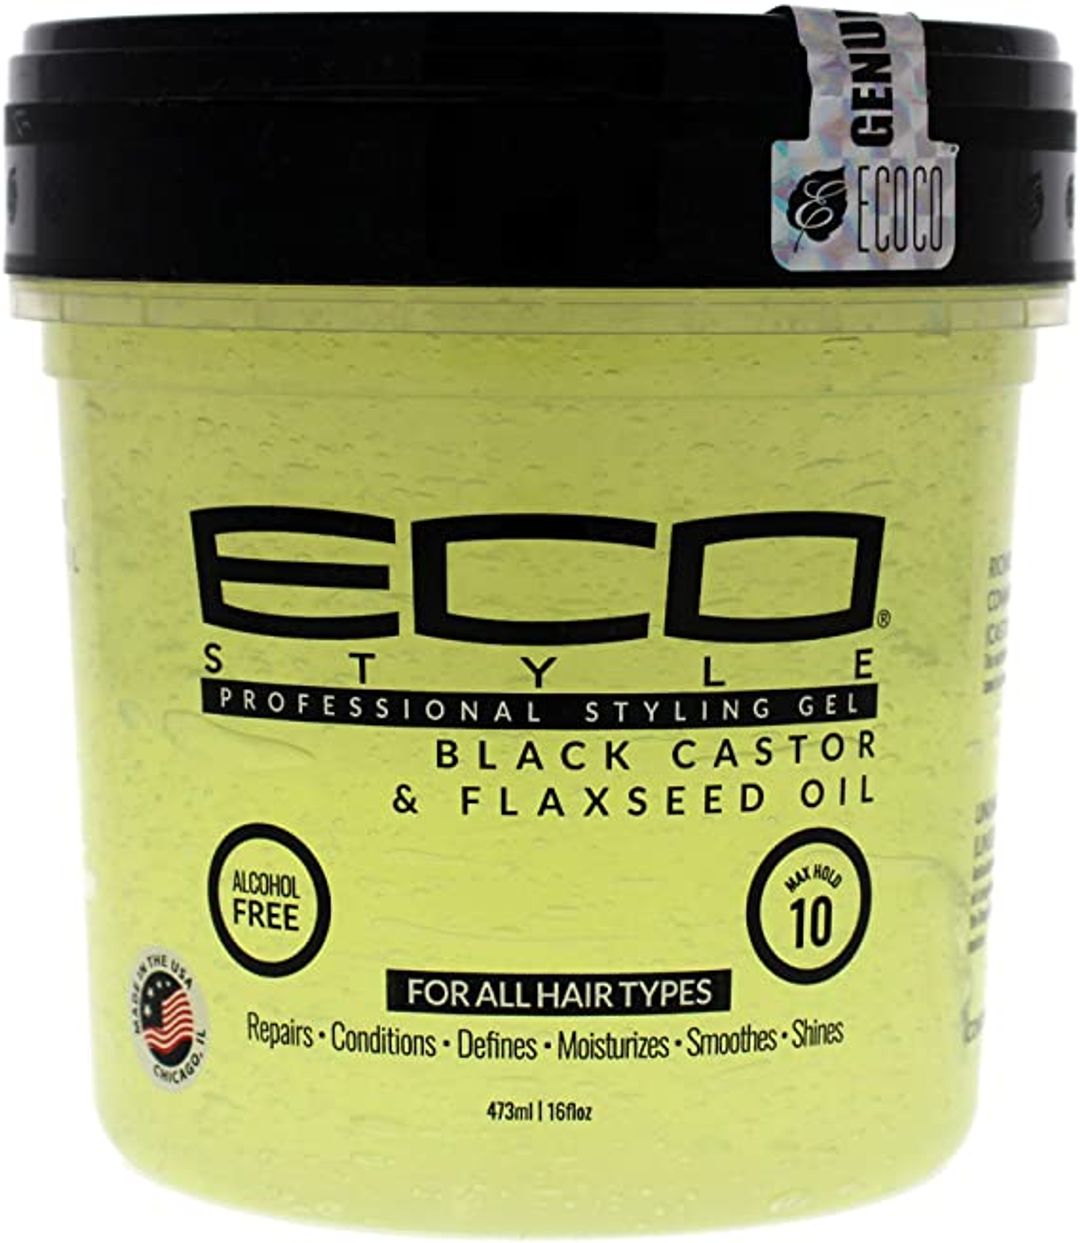 Eco Style Black Castor & Flaxseed Oil Styling Gel - 16oz